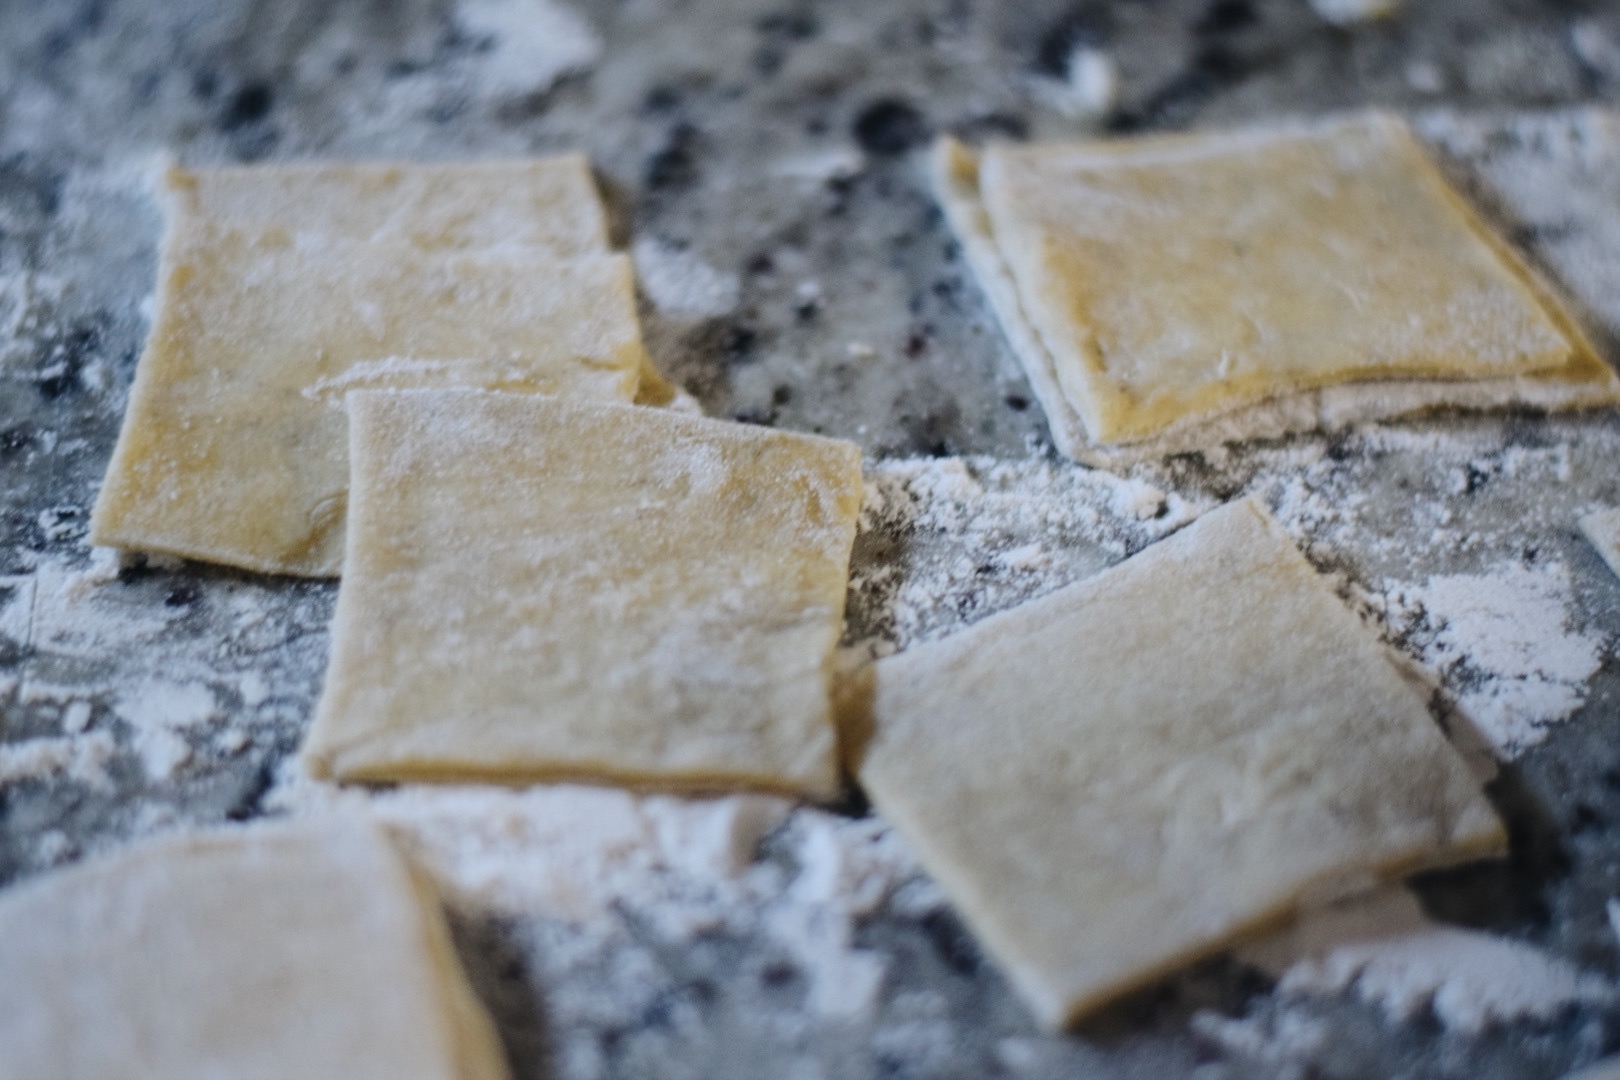 ravioli dough without filling on a floured surface